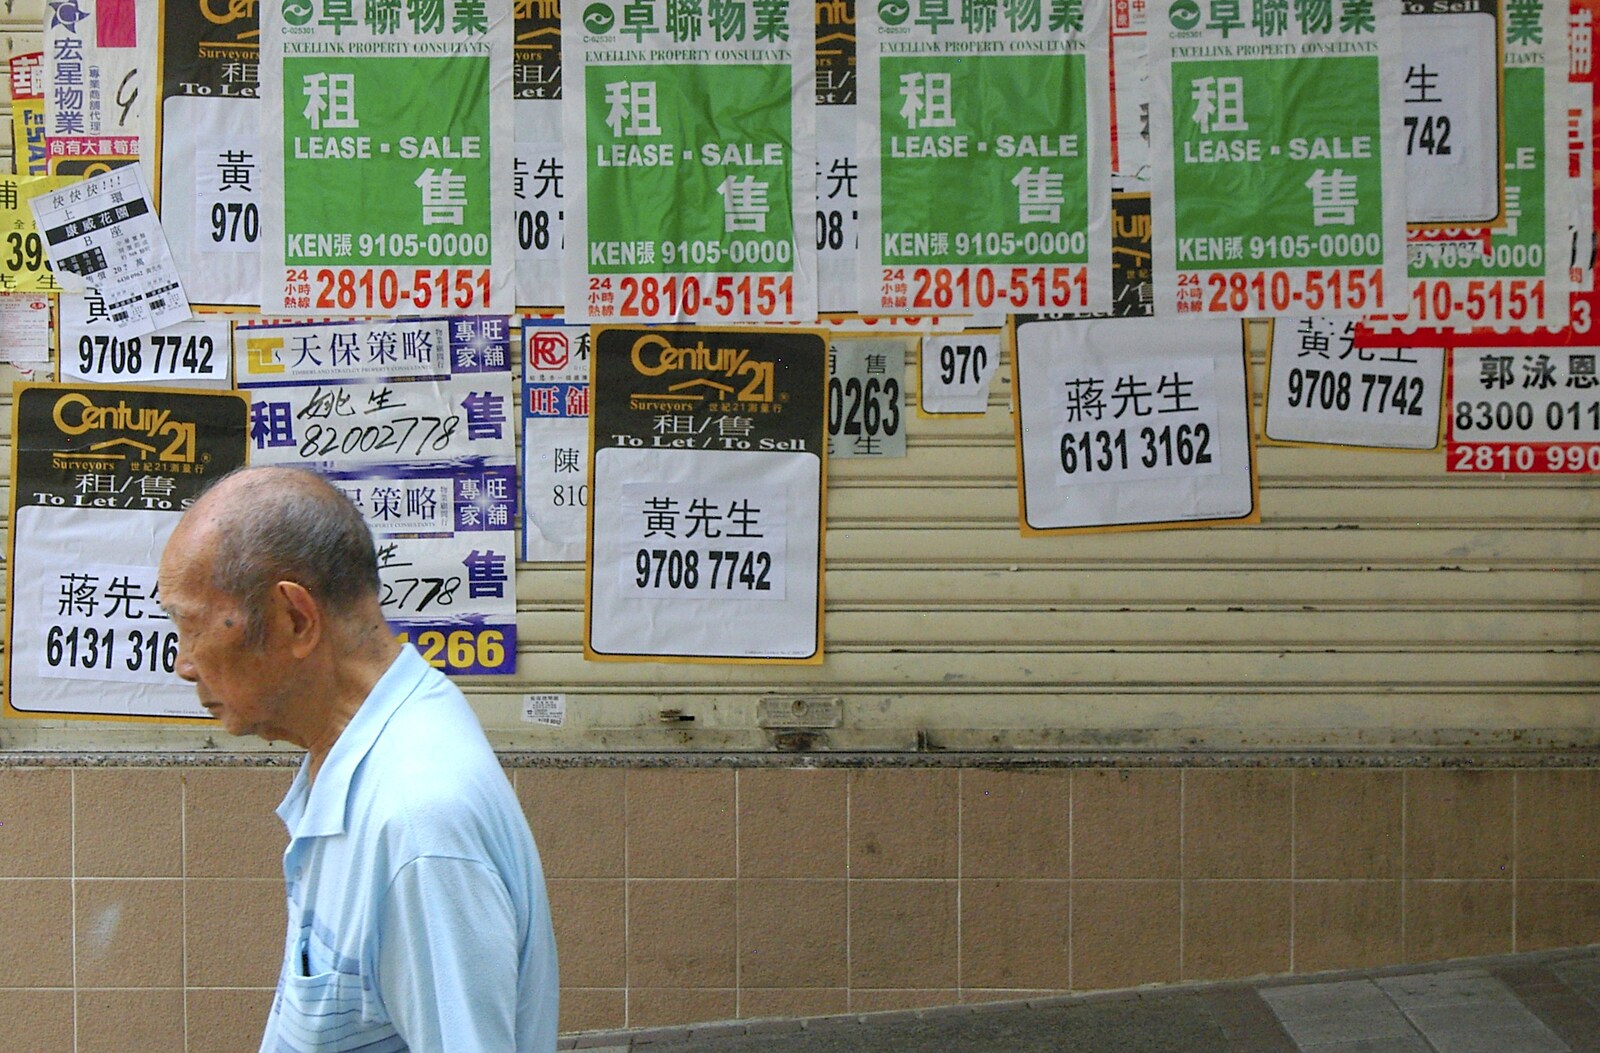 An old dude walks past posters from Wan Chai and Central, Hong Kong, China - 2nd October 2006